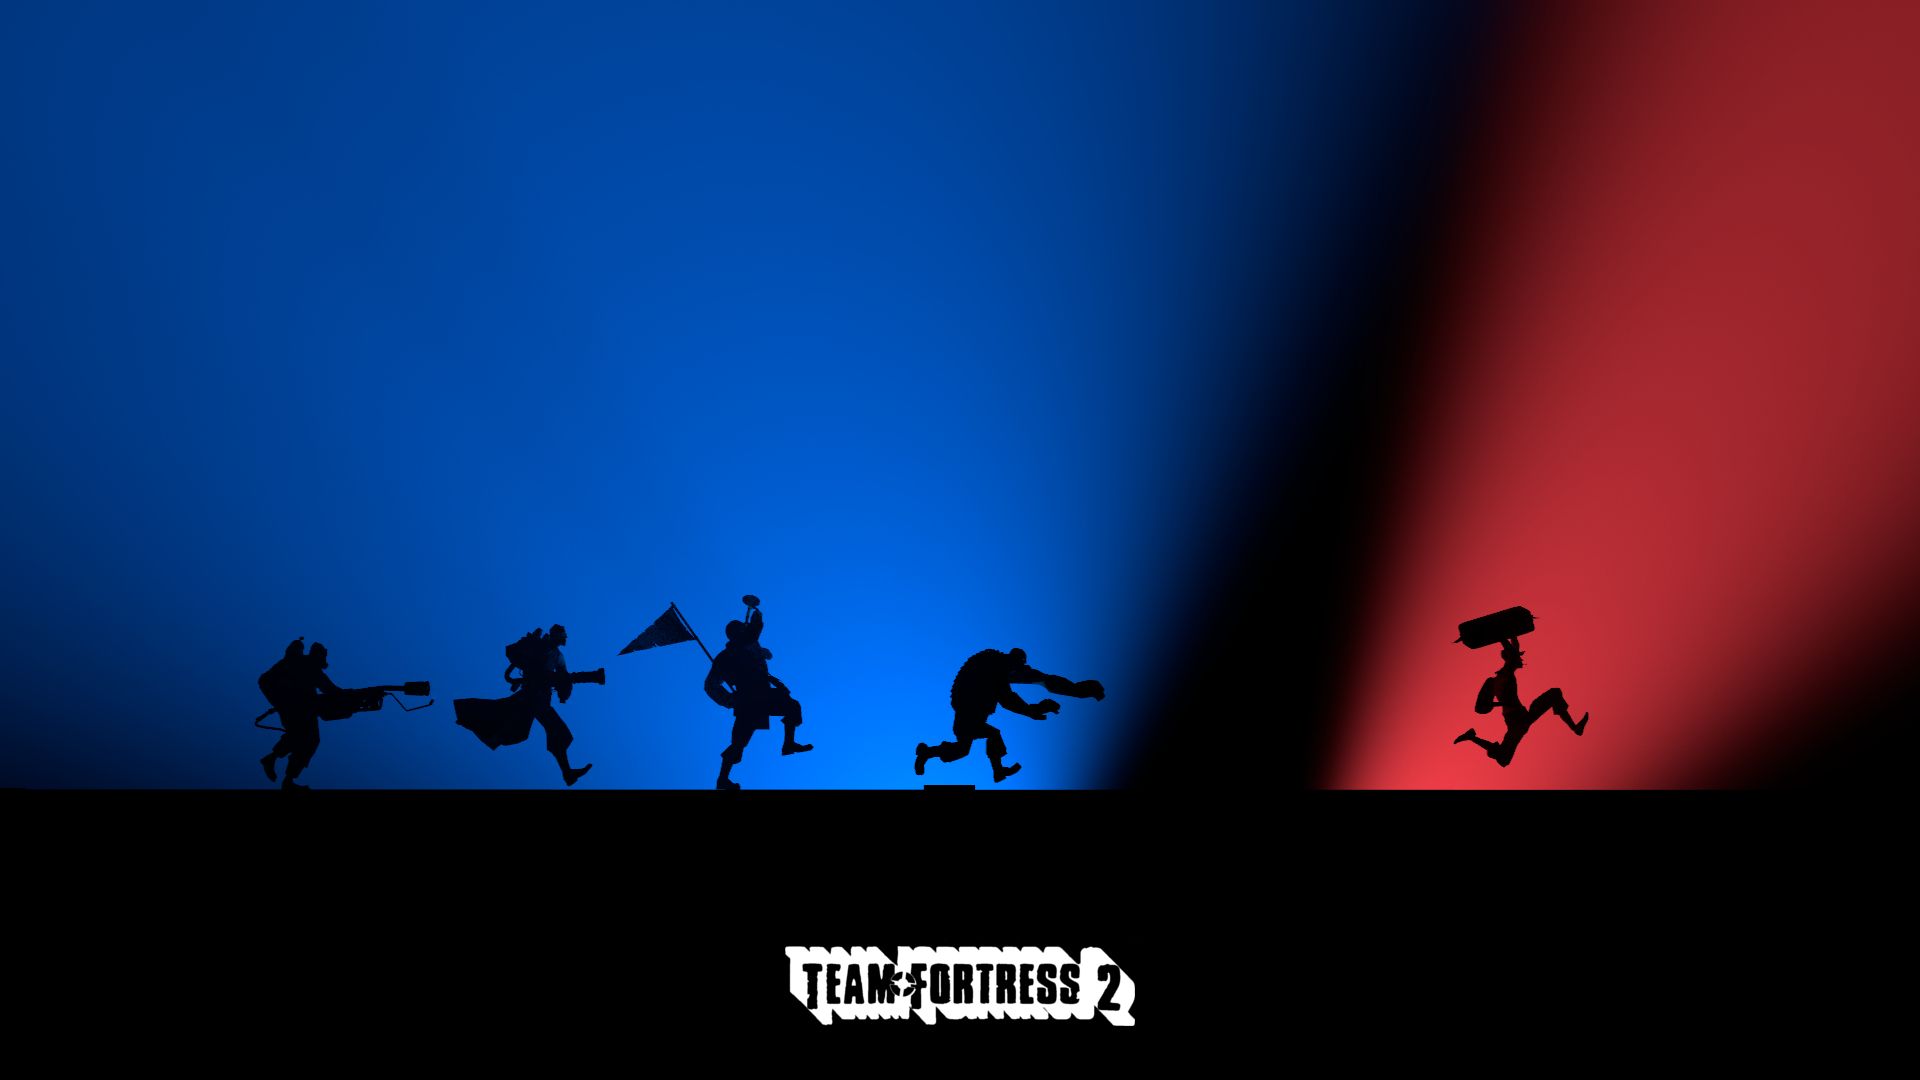 Wallpaper - The Chase (1920x1080) : tf2